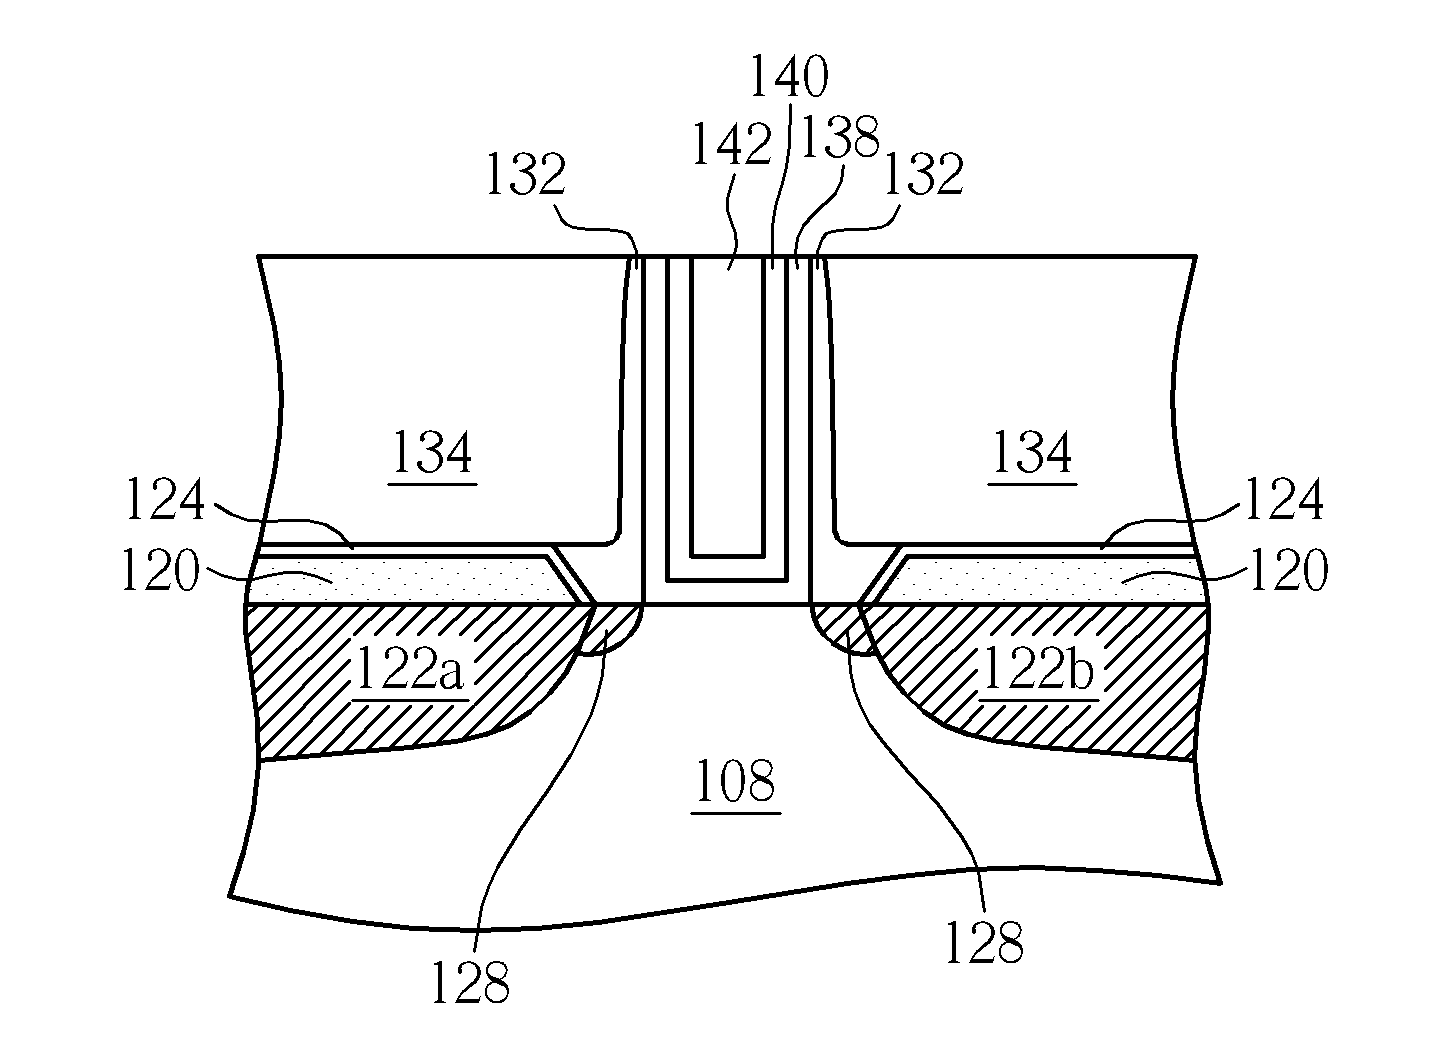 Semiconductor structure and method of fabricating the same